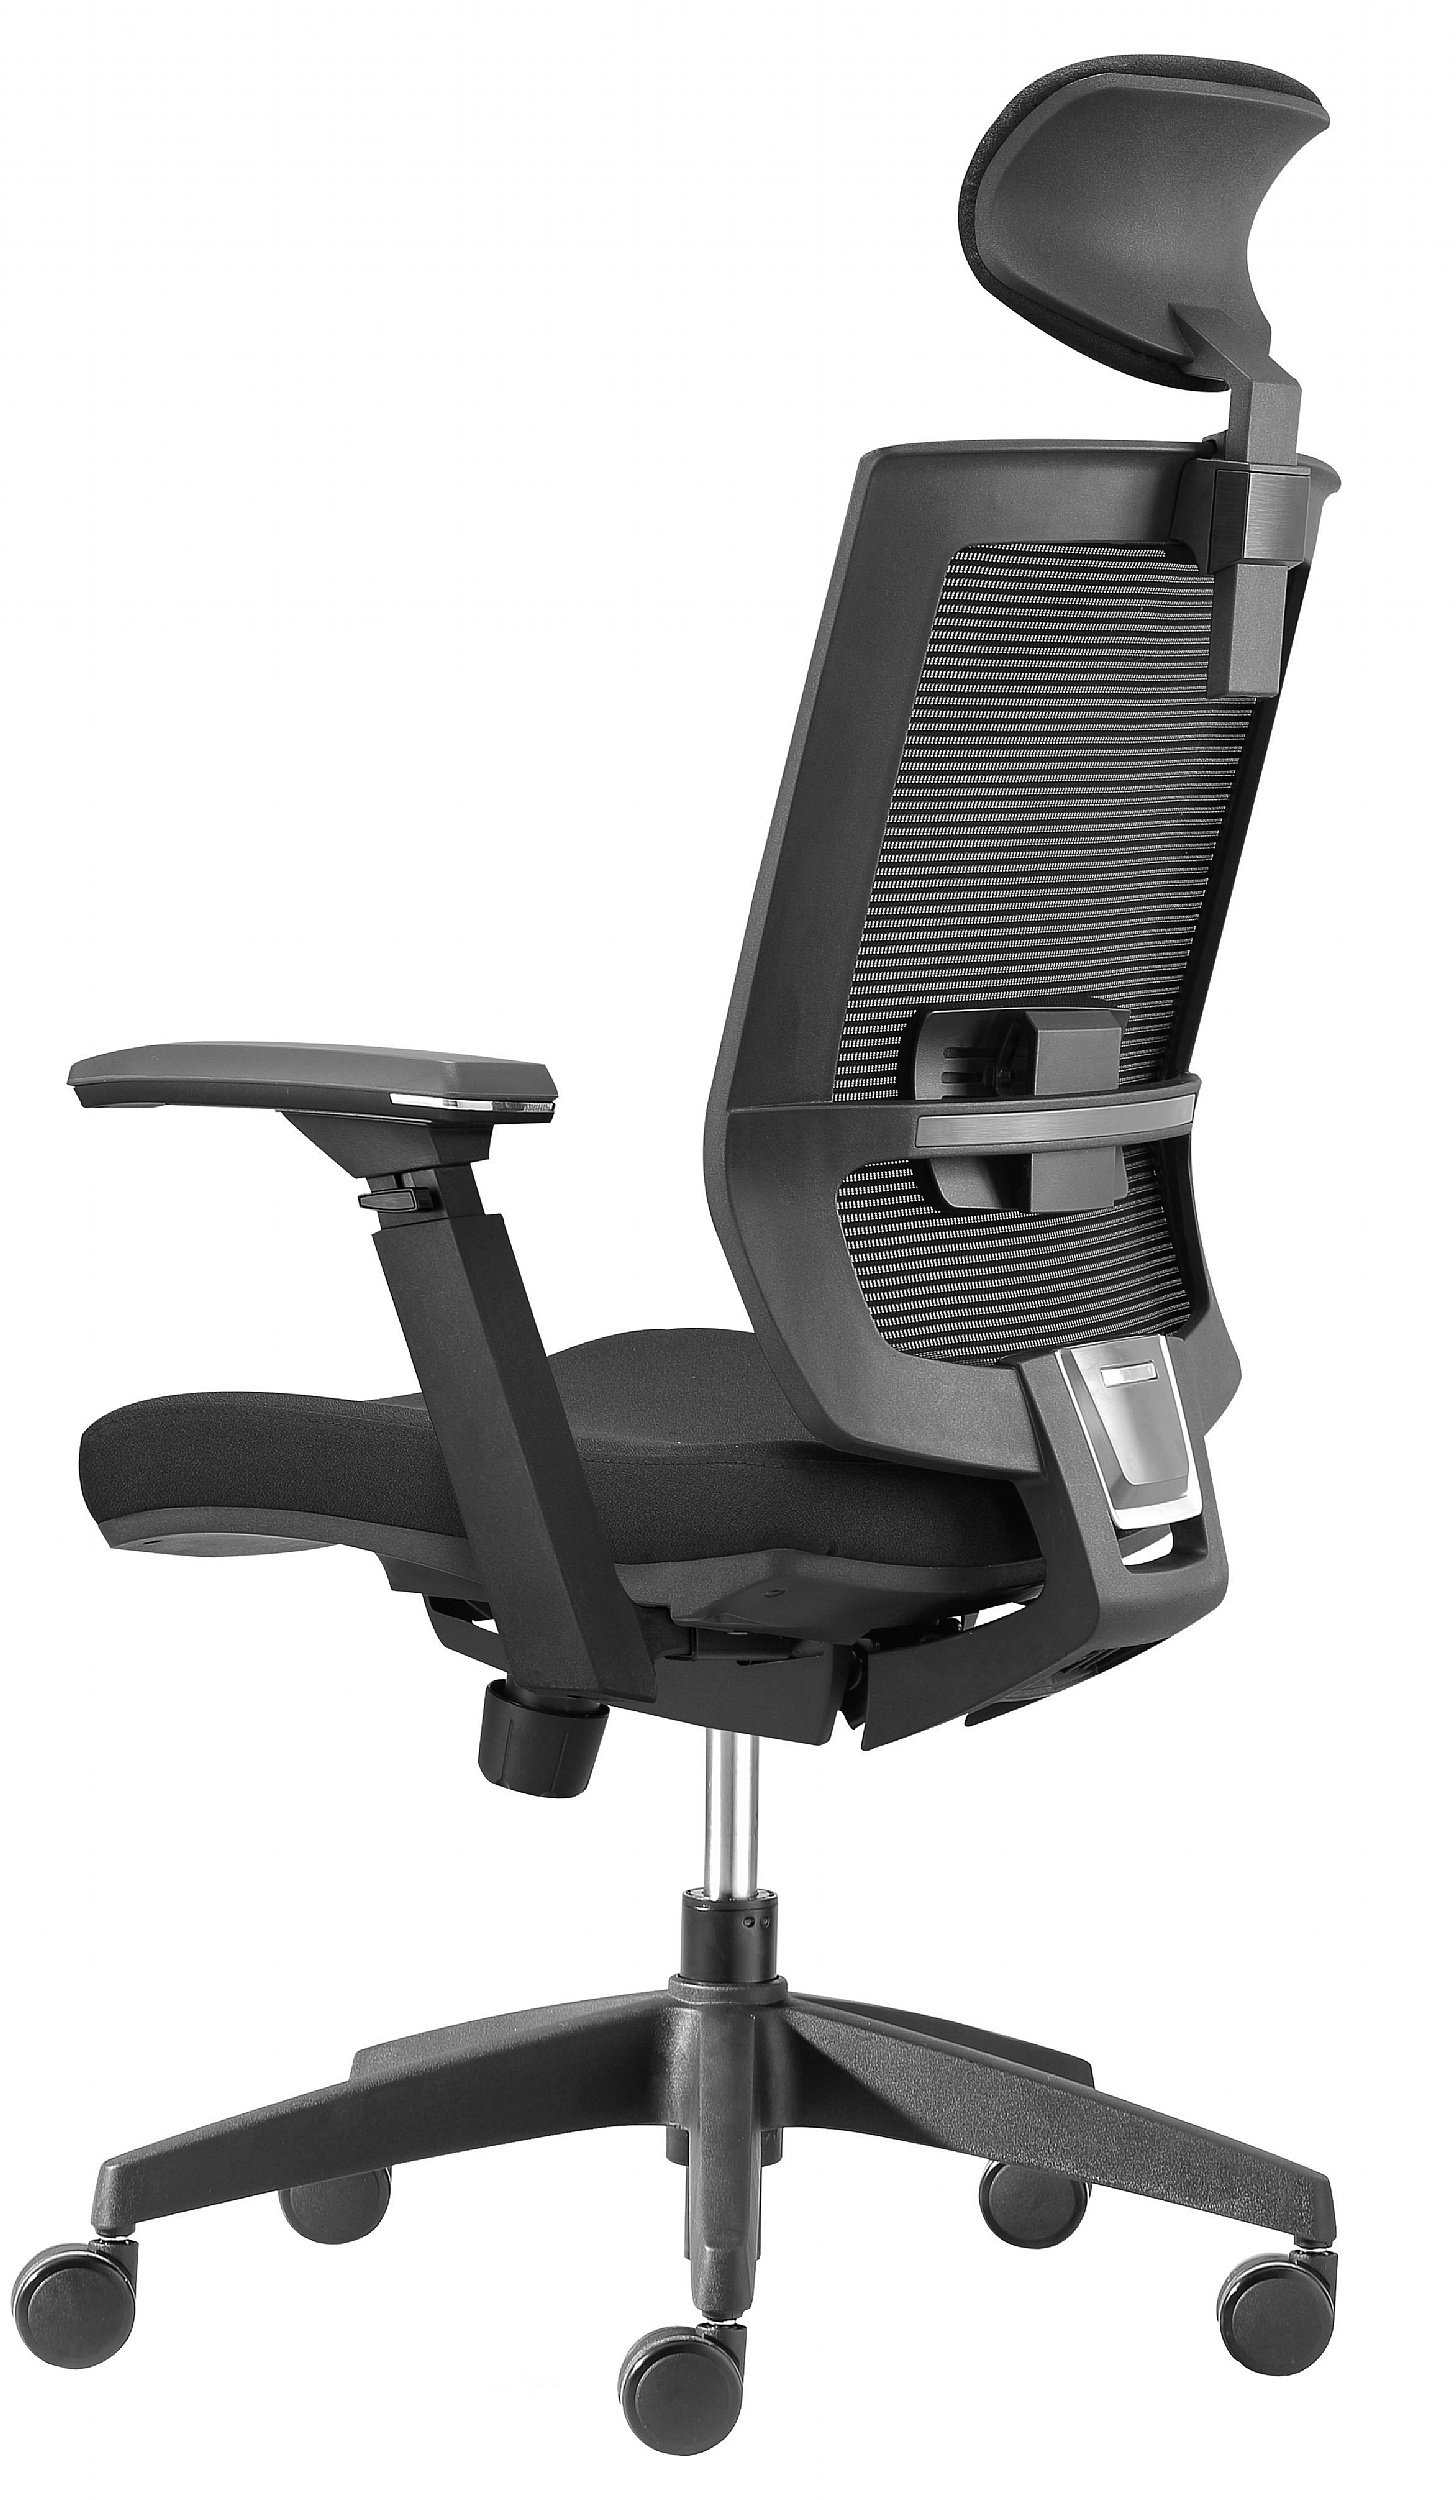 Capri Deluxe Mesh Office Chair With, Deluxe Mesh Ergonomic Office Chair With Headrest Review